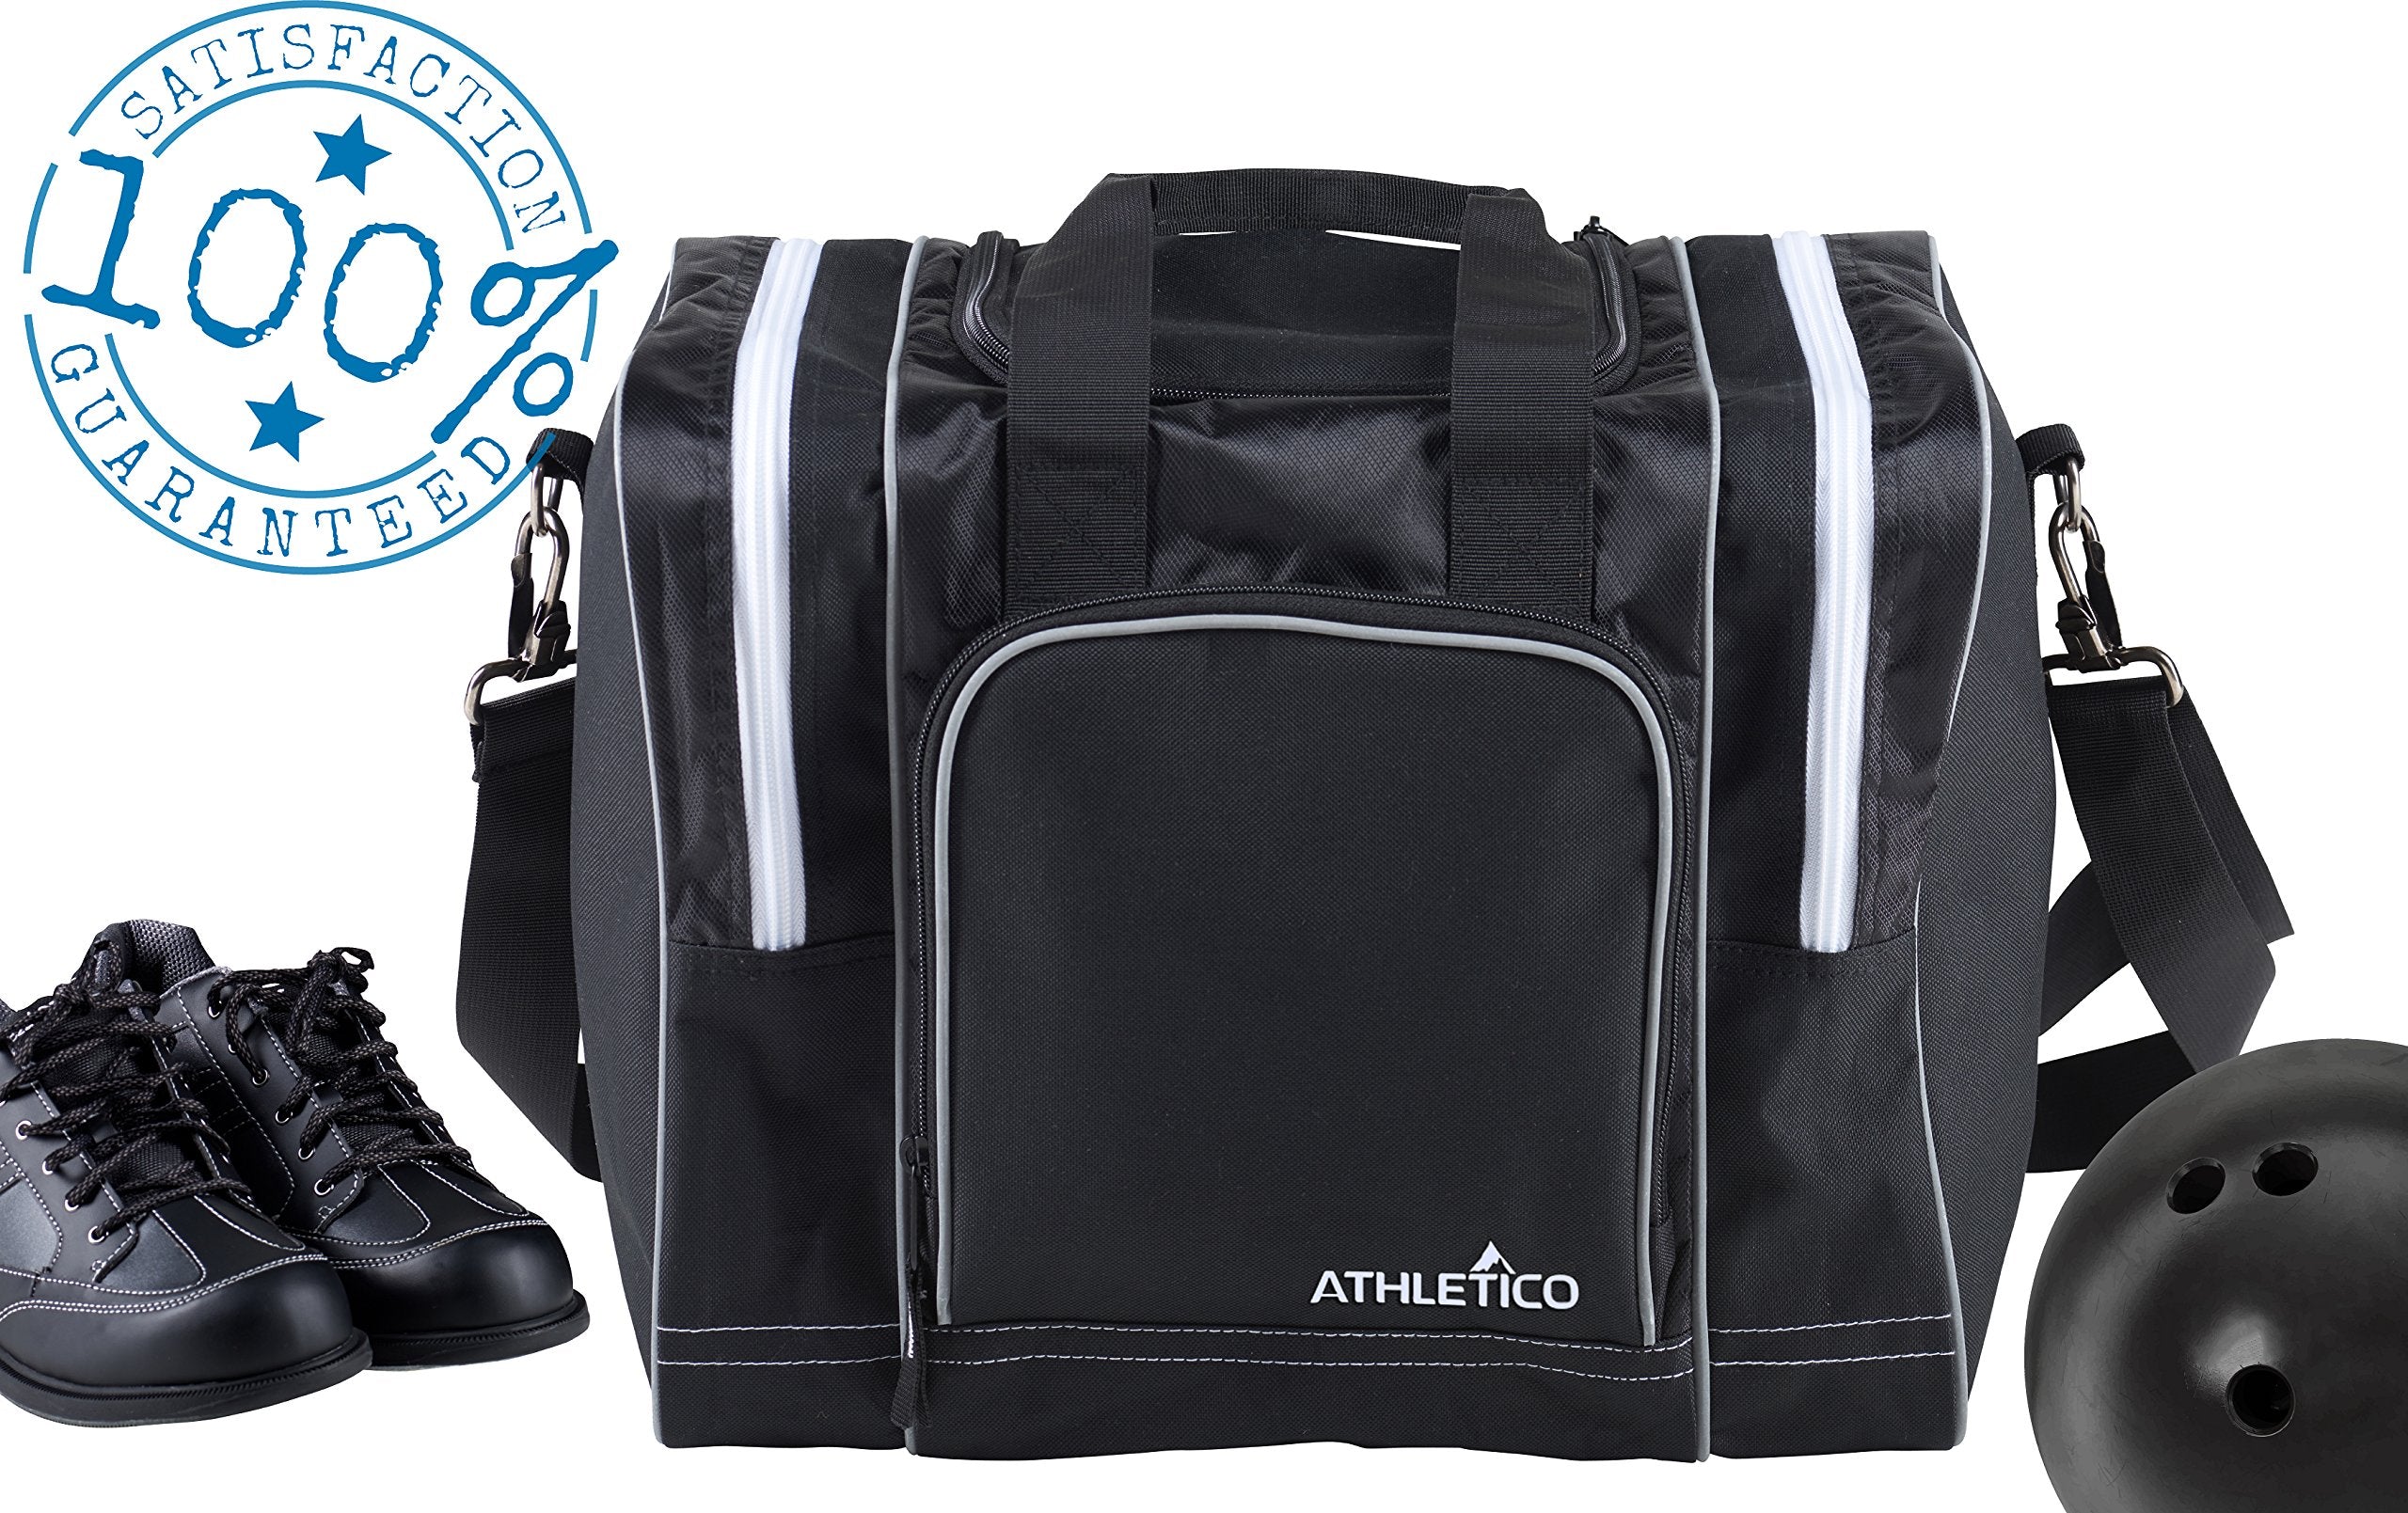 Athletico Bowling Bag for Single Ball - Single Ball Tote Bag With Padded Ball Holder - Fits a Single Pair of Bowling Shoes Up to Mens Size 14  - Like New